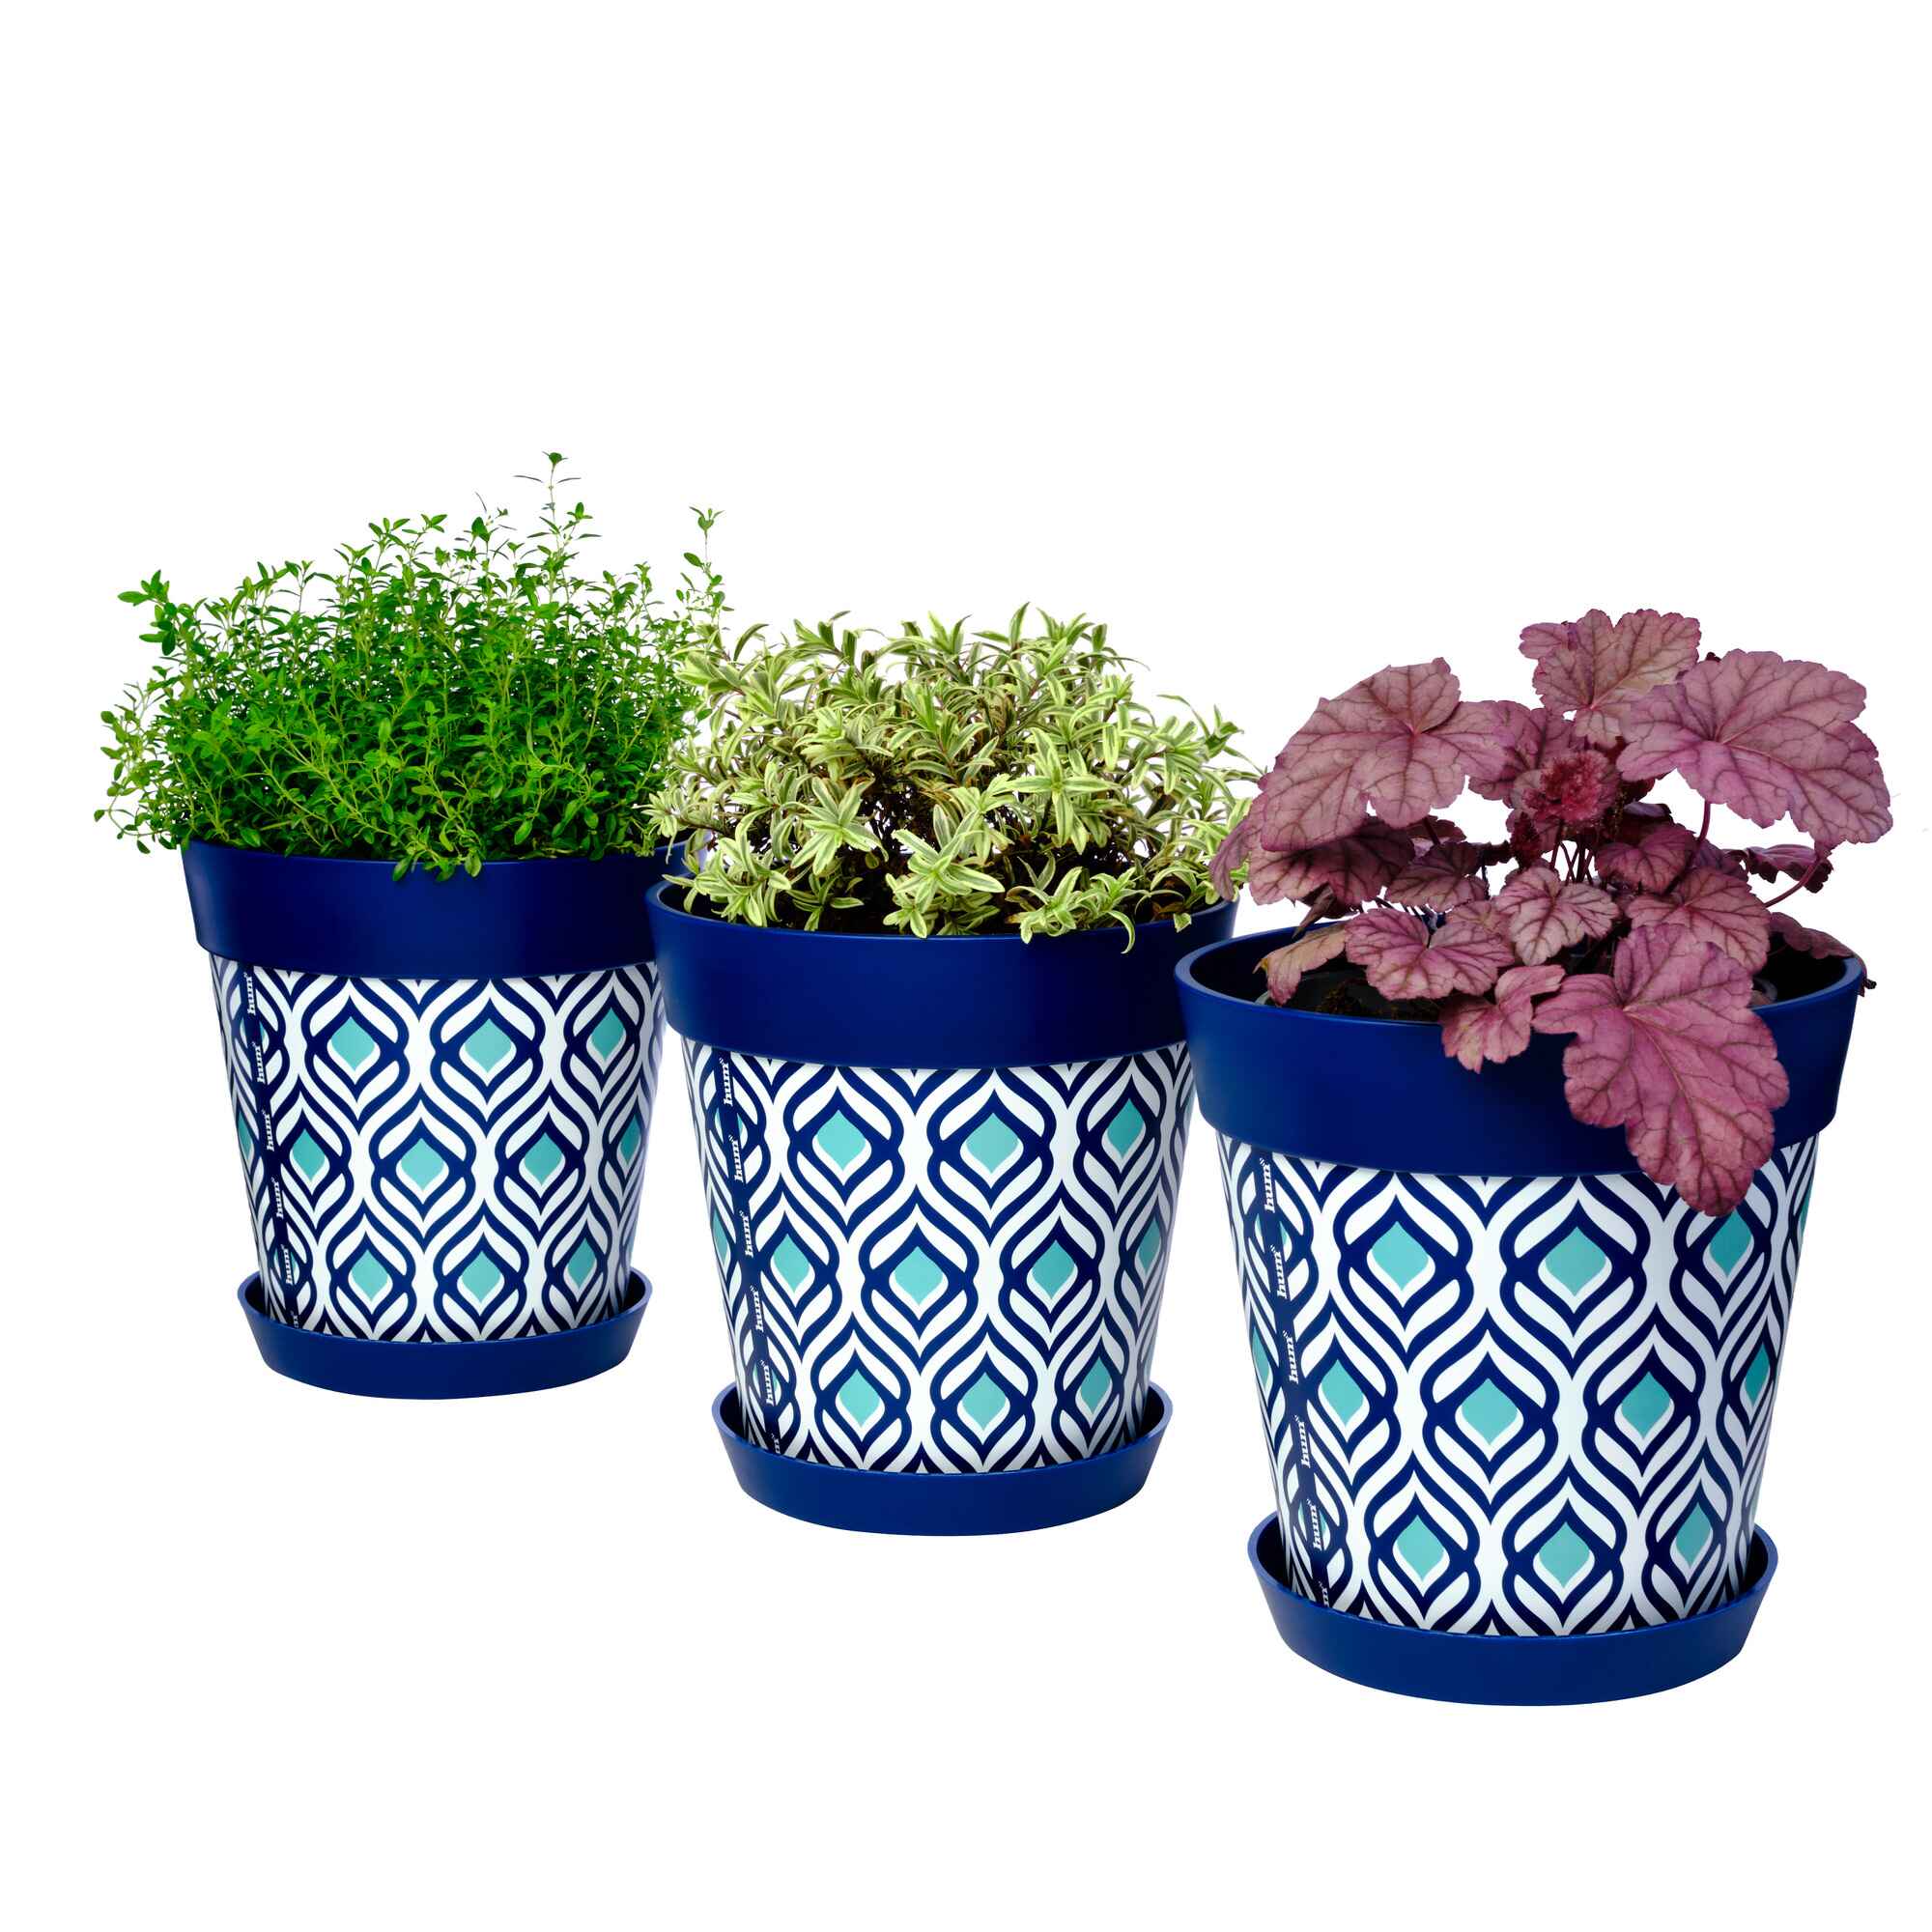 Picture of 3 Planted Medium 22cm Blue Peacock Pattern Plastic Indoor/Outdoor Flowerpot and Saucers